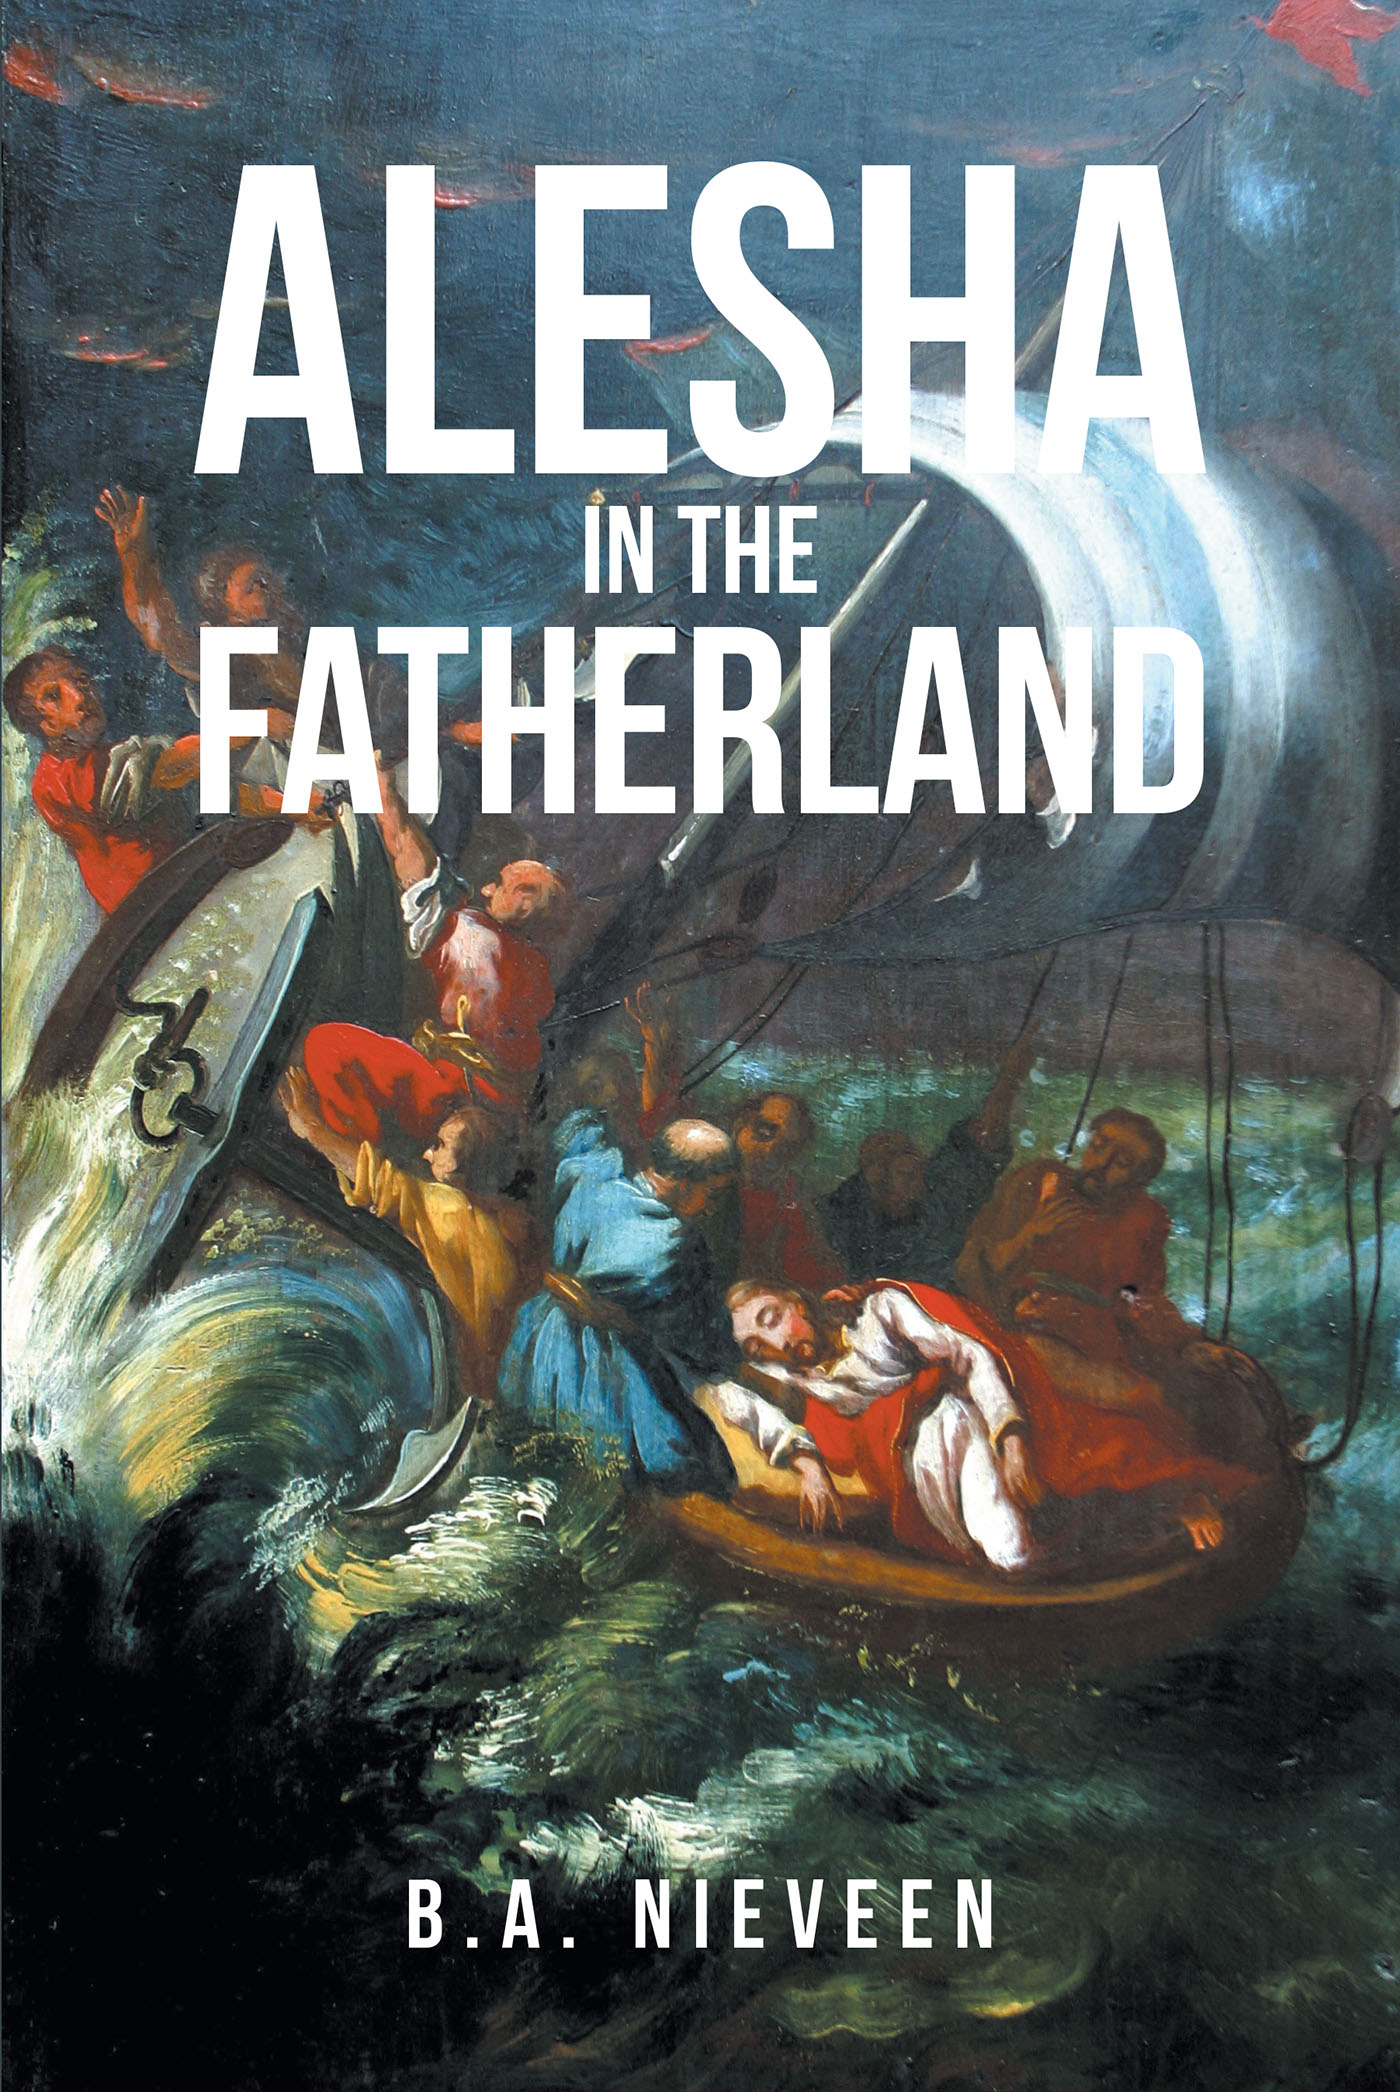 Author B.A. Nieveen’s New Book, "Alesha in the Fatherland," is a Captivating Story of One Young Woman's Journey in a World That Goes Against Her Core Beliefs & Instincts